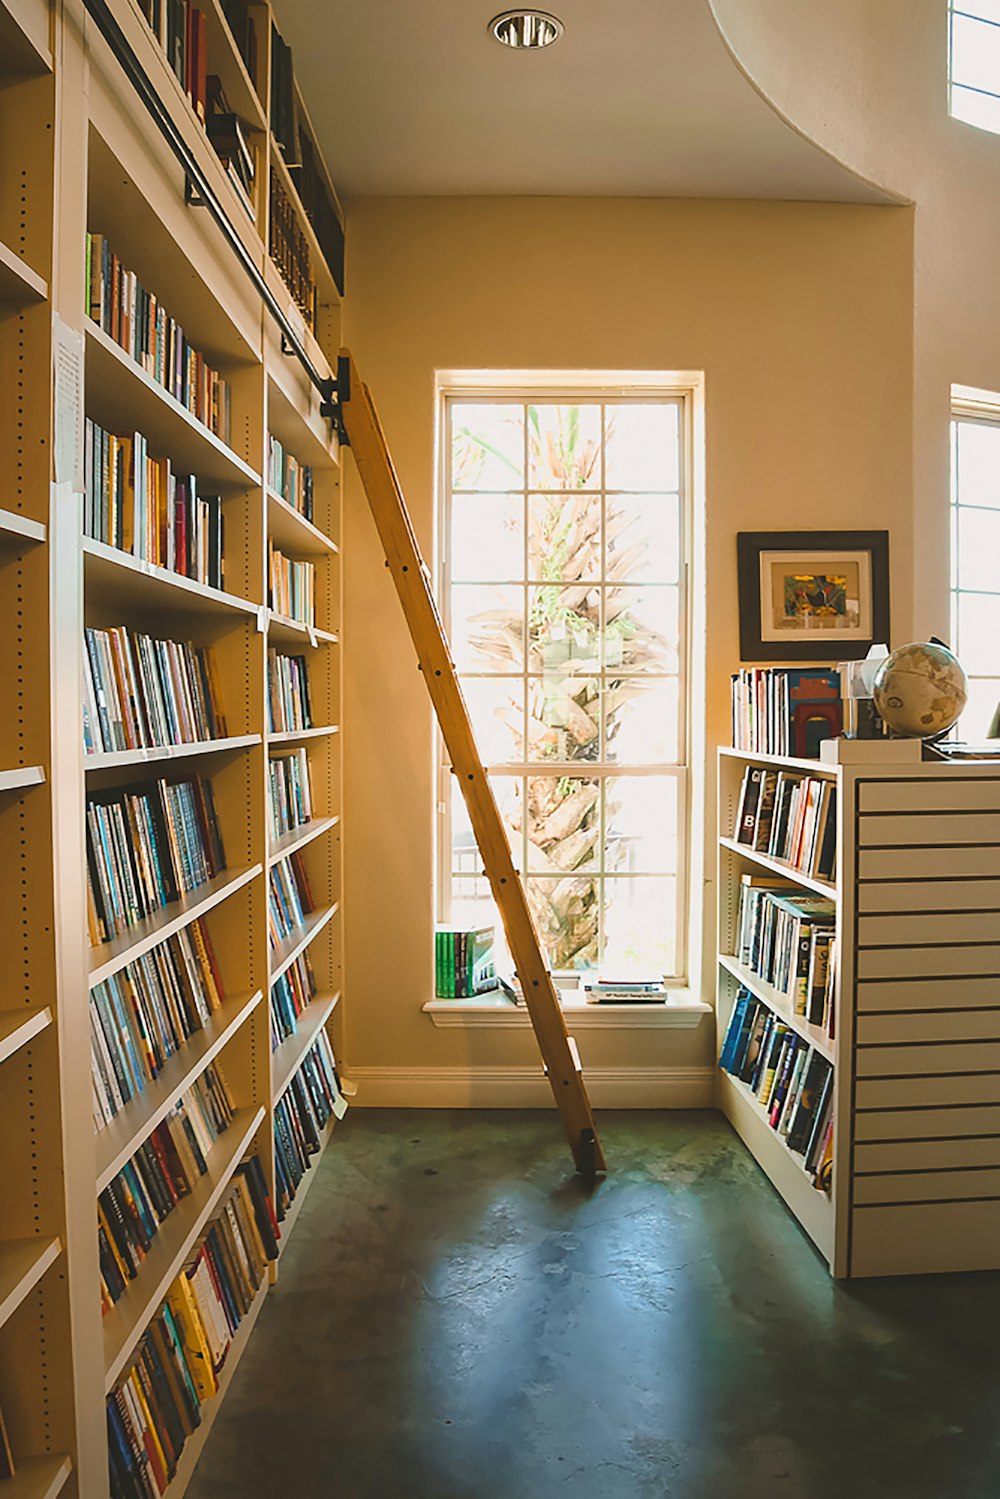 brown wooden ladder leaning on white wooden book shelf